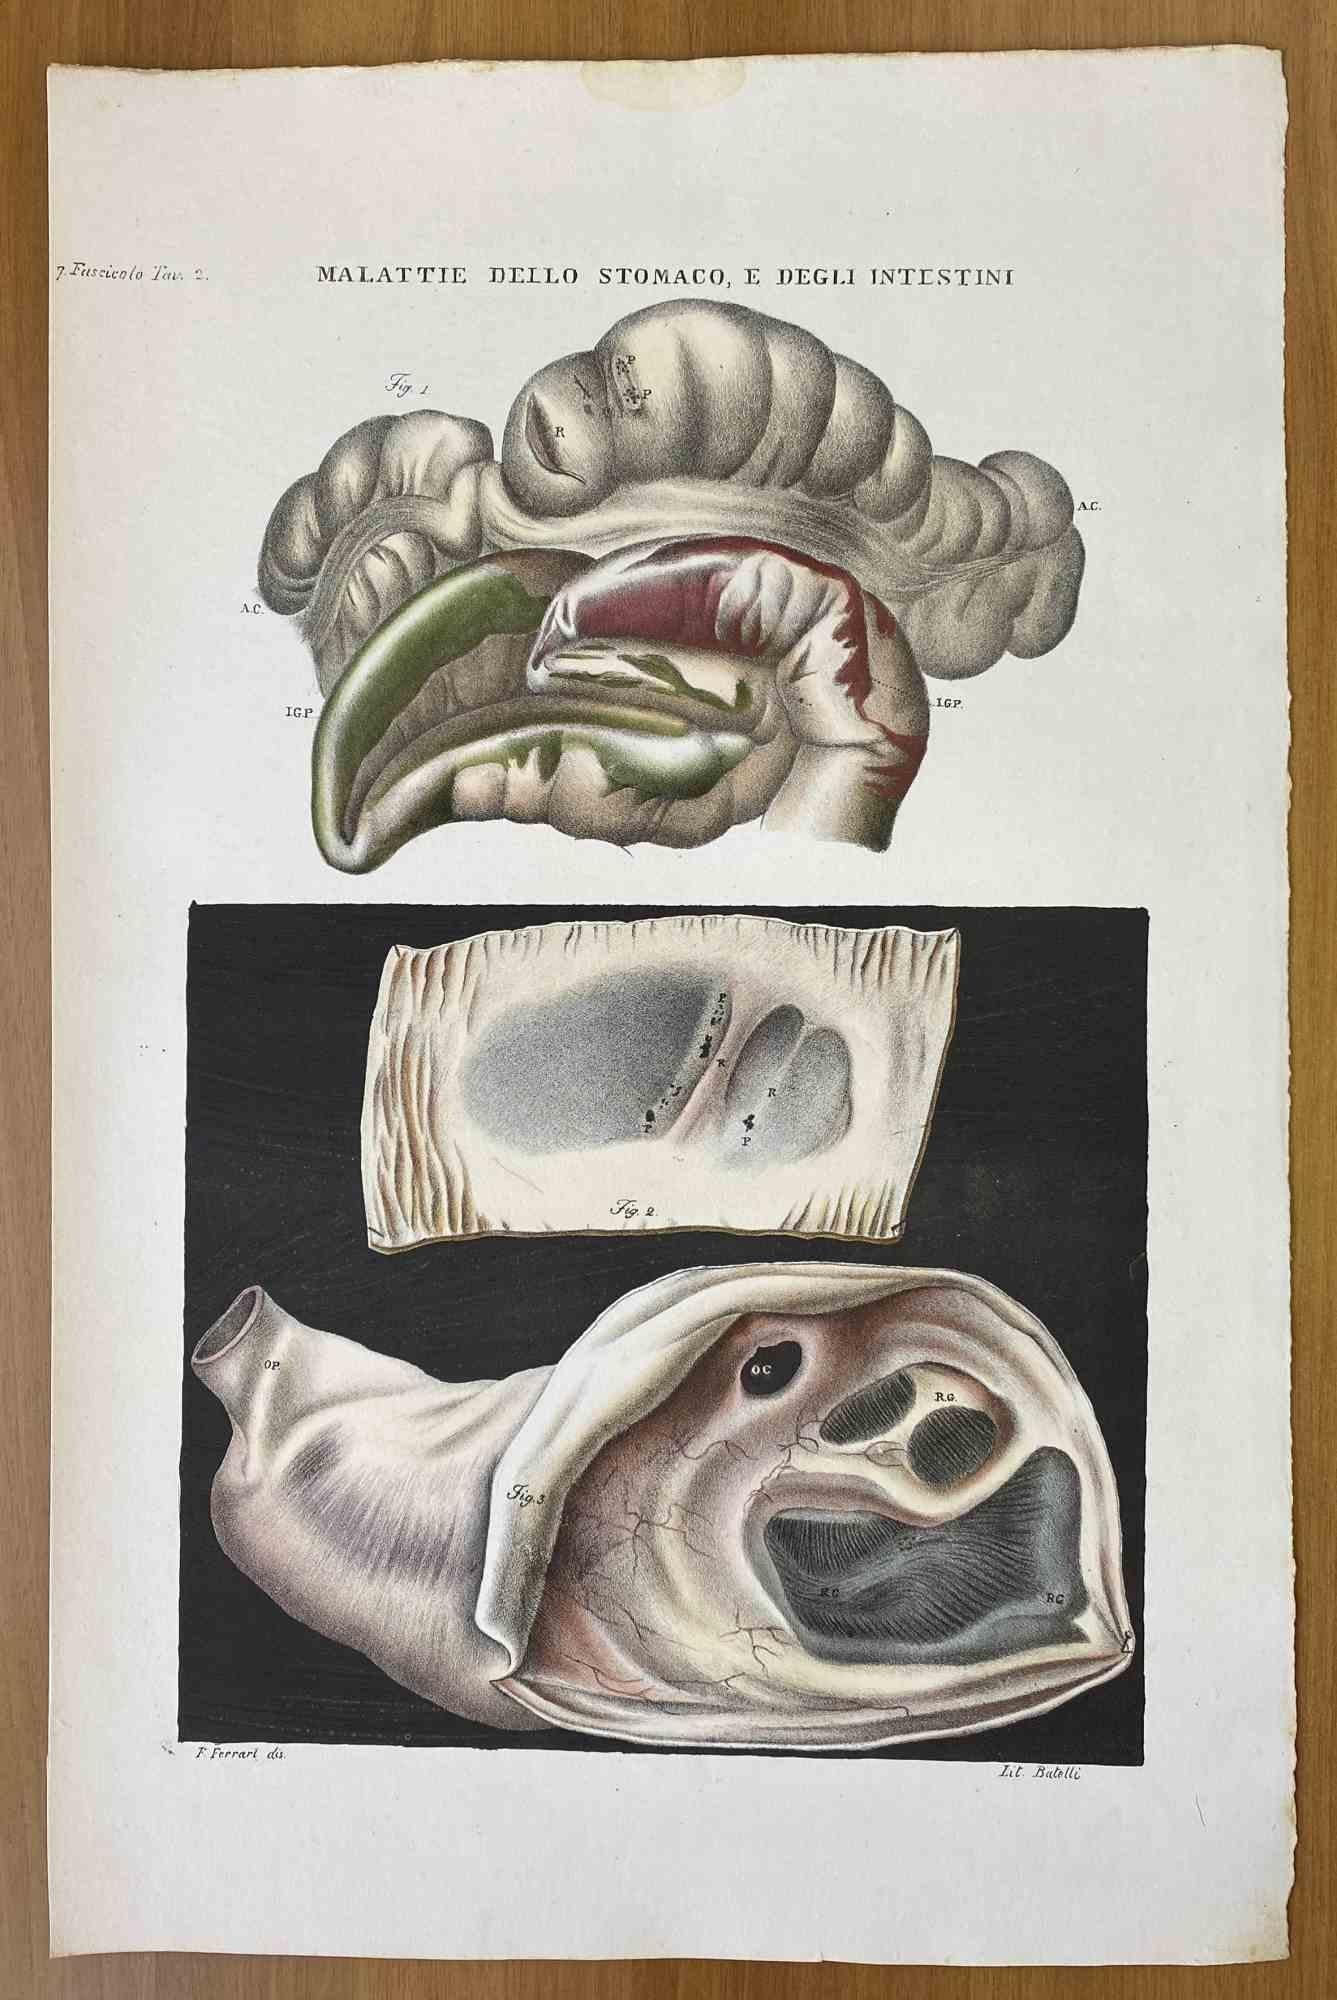 Diseases of the Stomach and Intestines is a lithograph hand colored by Ottavio Muzzi for the edition of Antoine Chazal, Human Anatomy, Printers Batelli and Ridolfi, 1843.

The work belongs to the Atlante generale della anatomia patologica del corpo